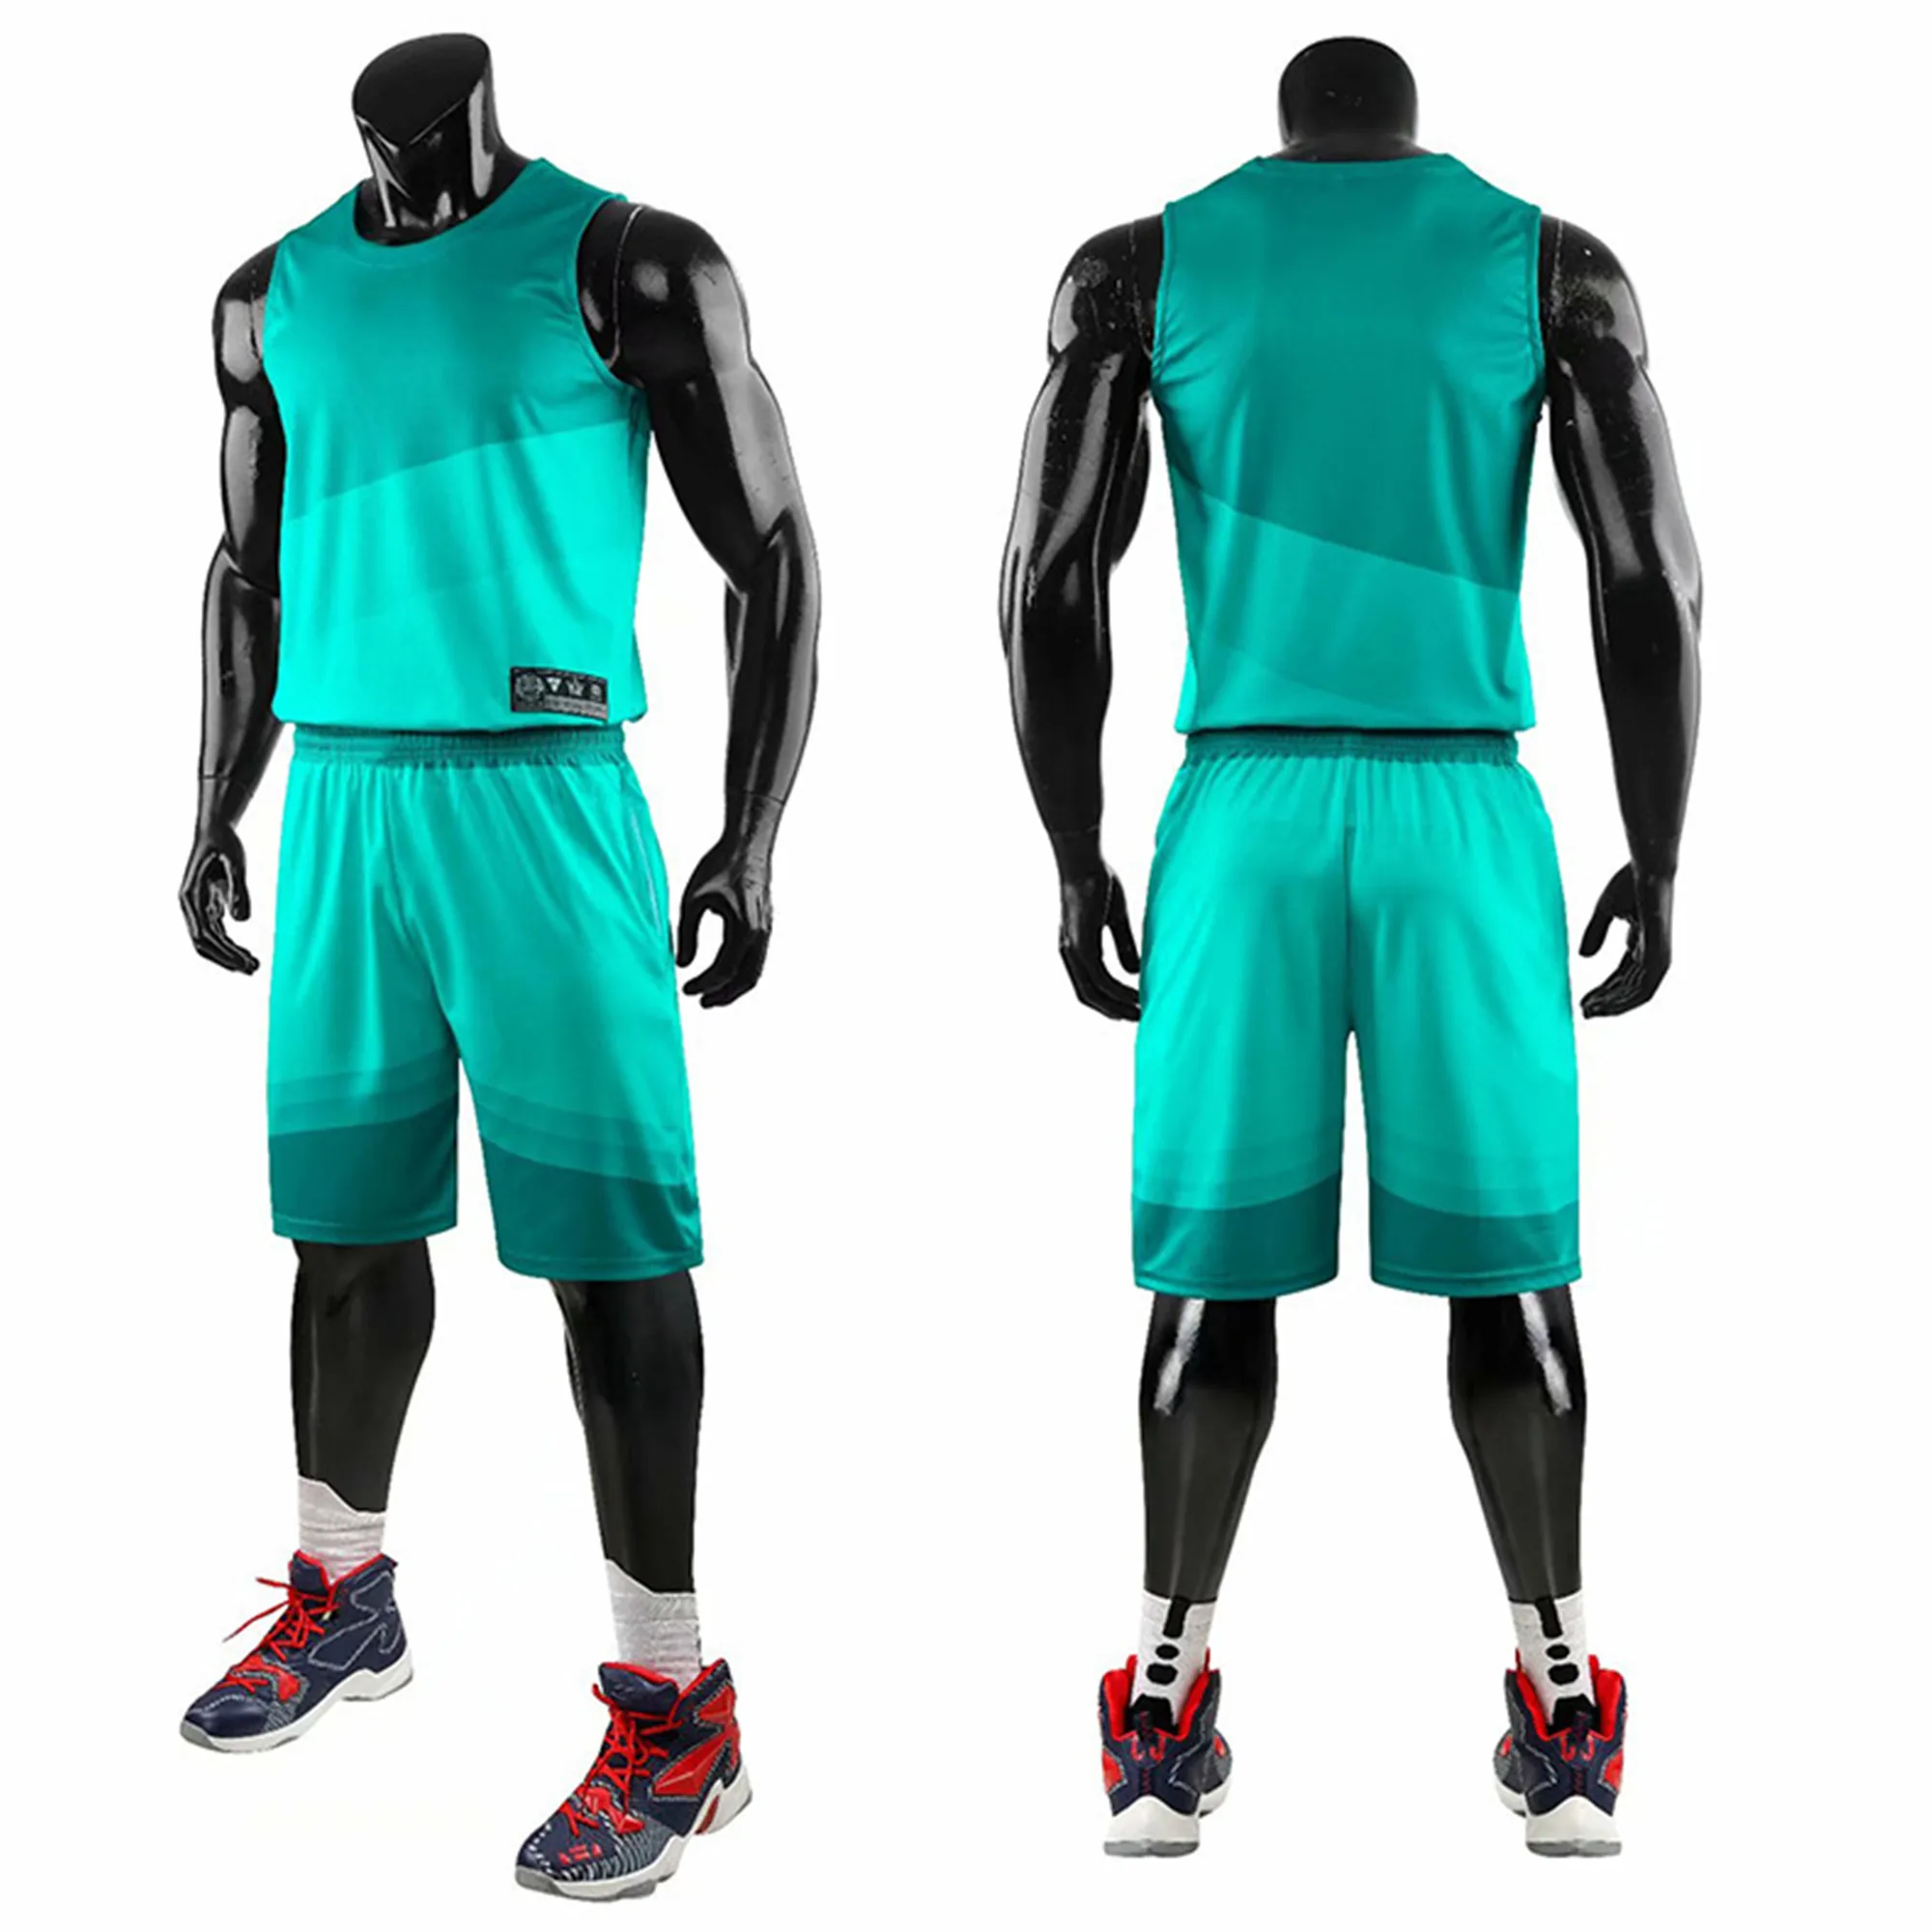 turquoise basketball jersey